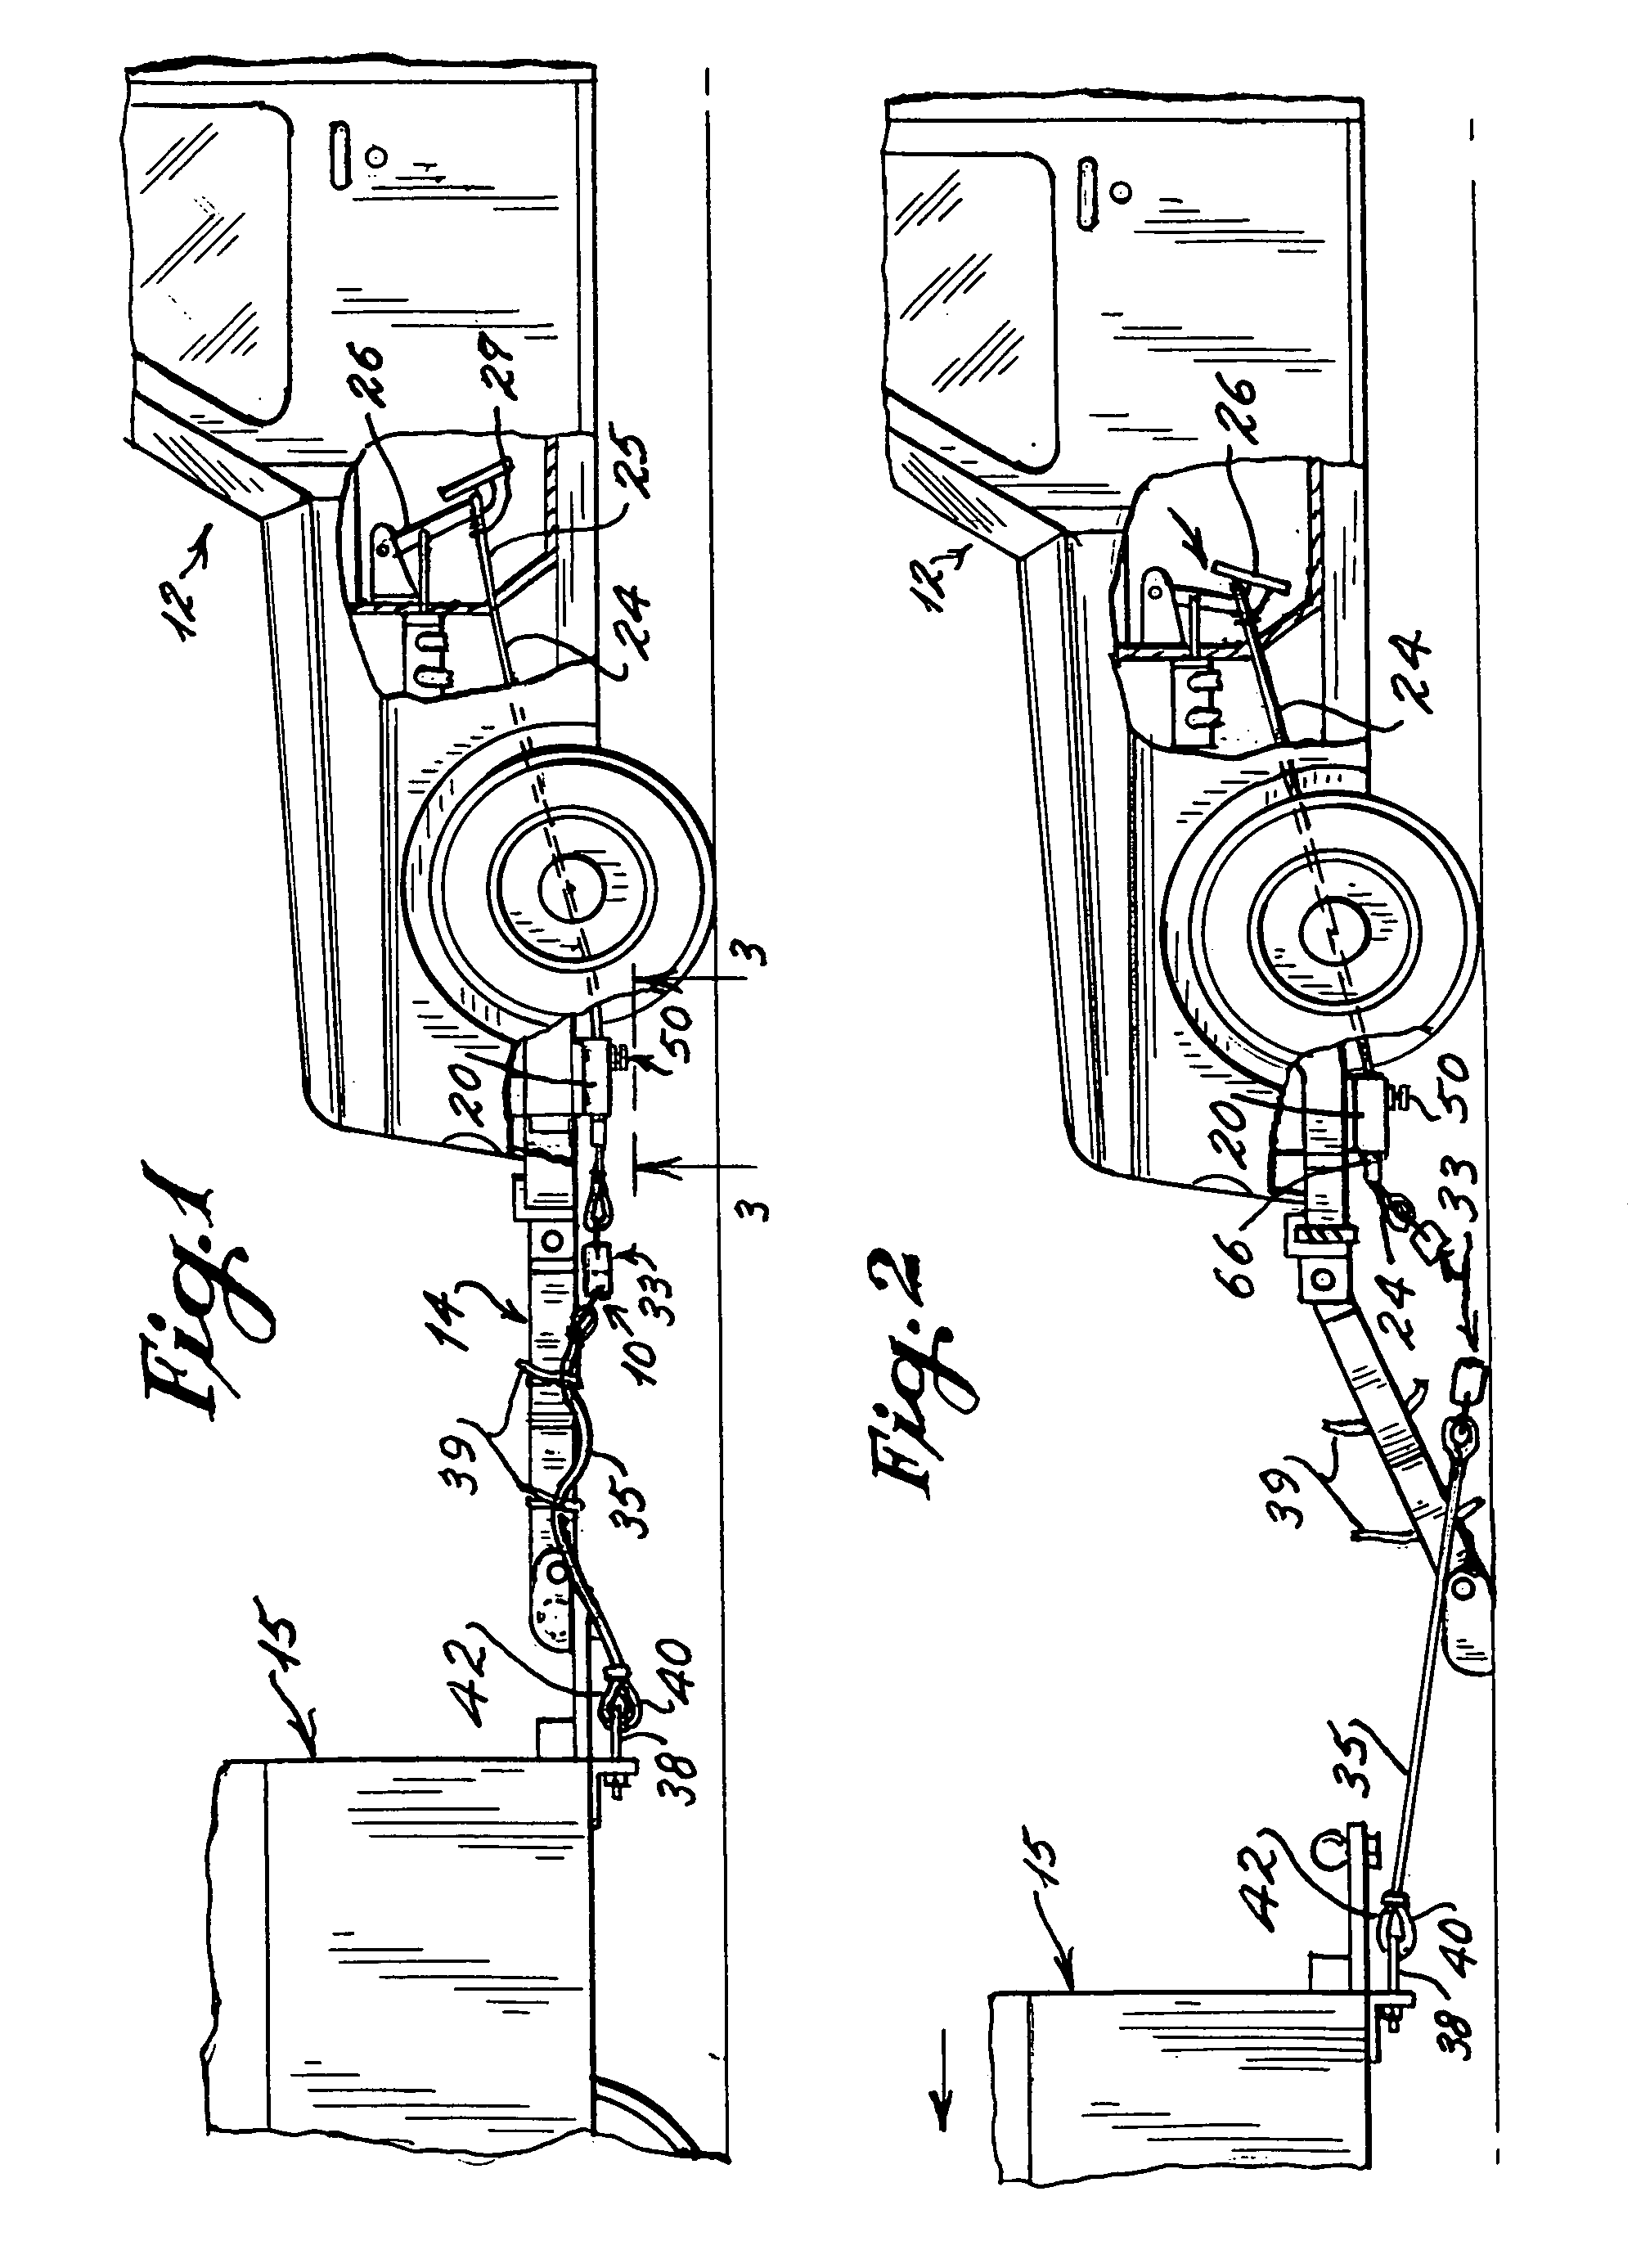 Premature activation stop for towed vehicle cable braking systems